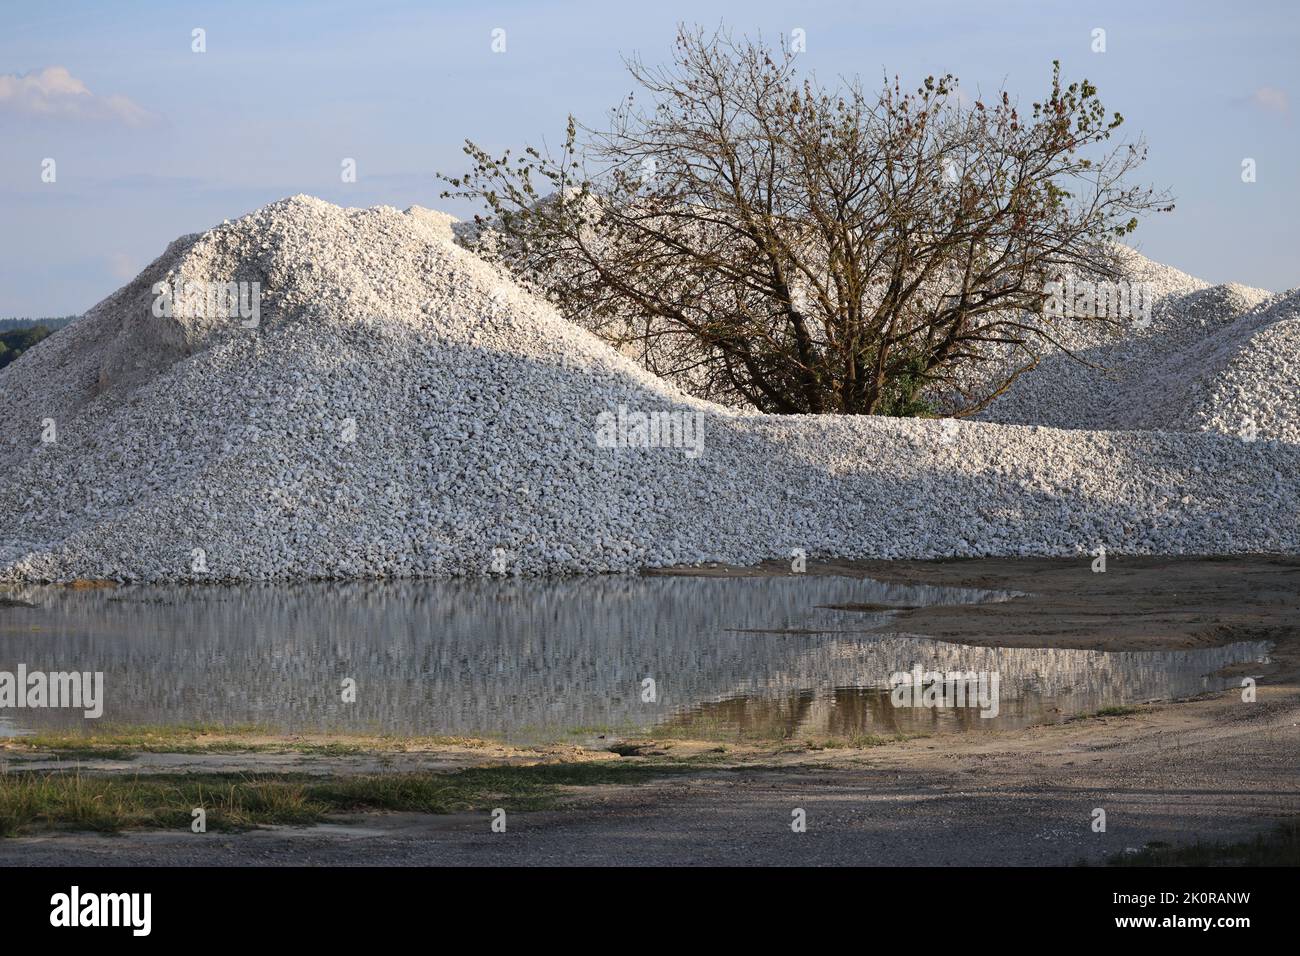 a Heap of Gypsum is reflected in a Puddle Stock Photo